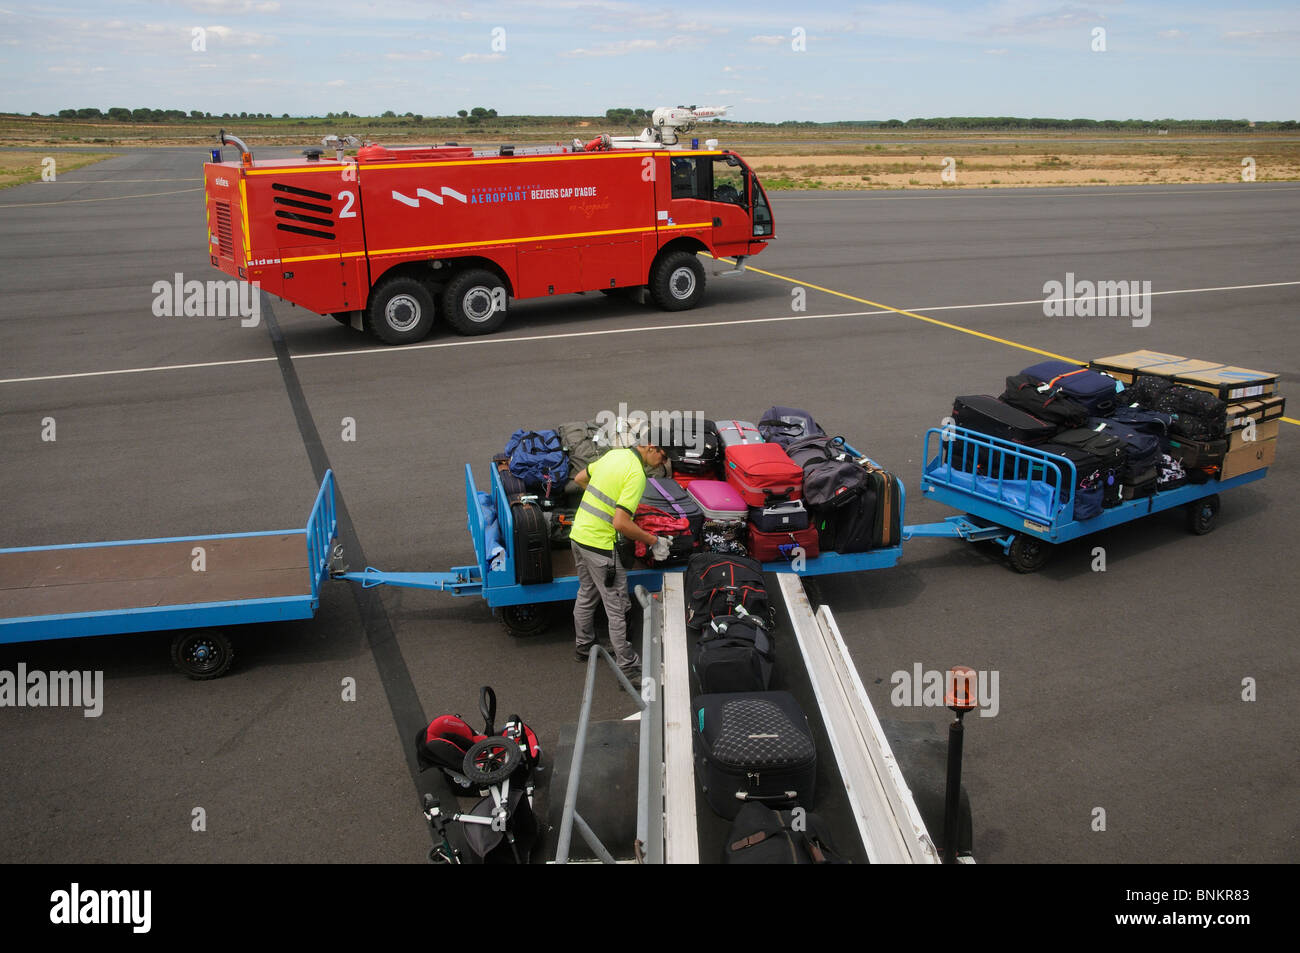 Airport services a fire truck & baggage handler loading bags from a trolley onto an aircraft at Beziers International Airport EU Stock Photo